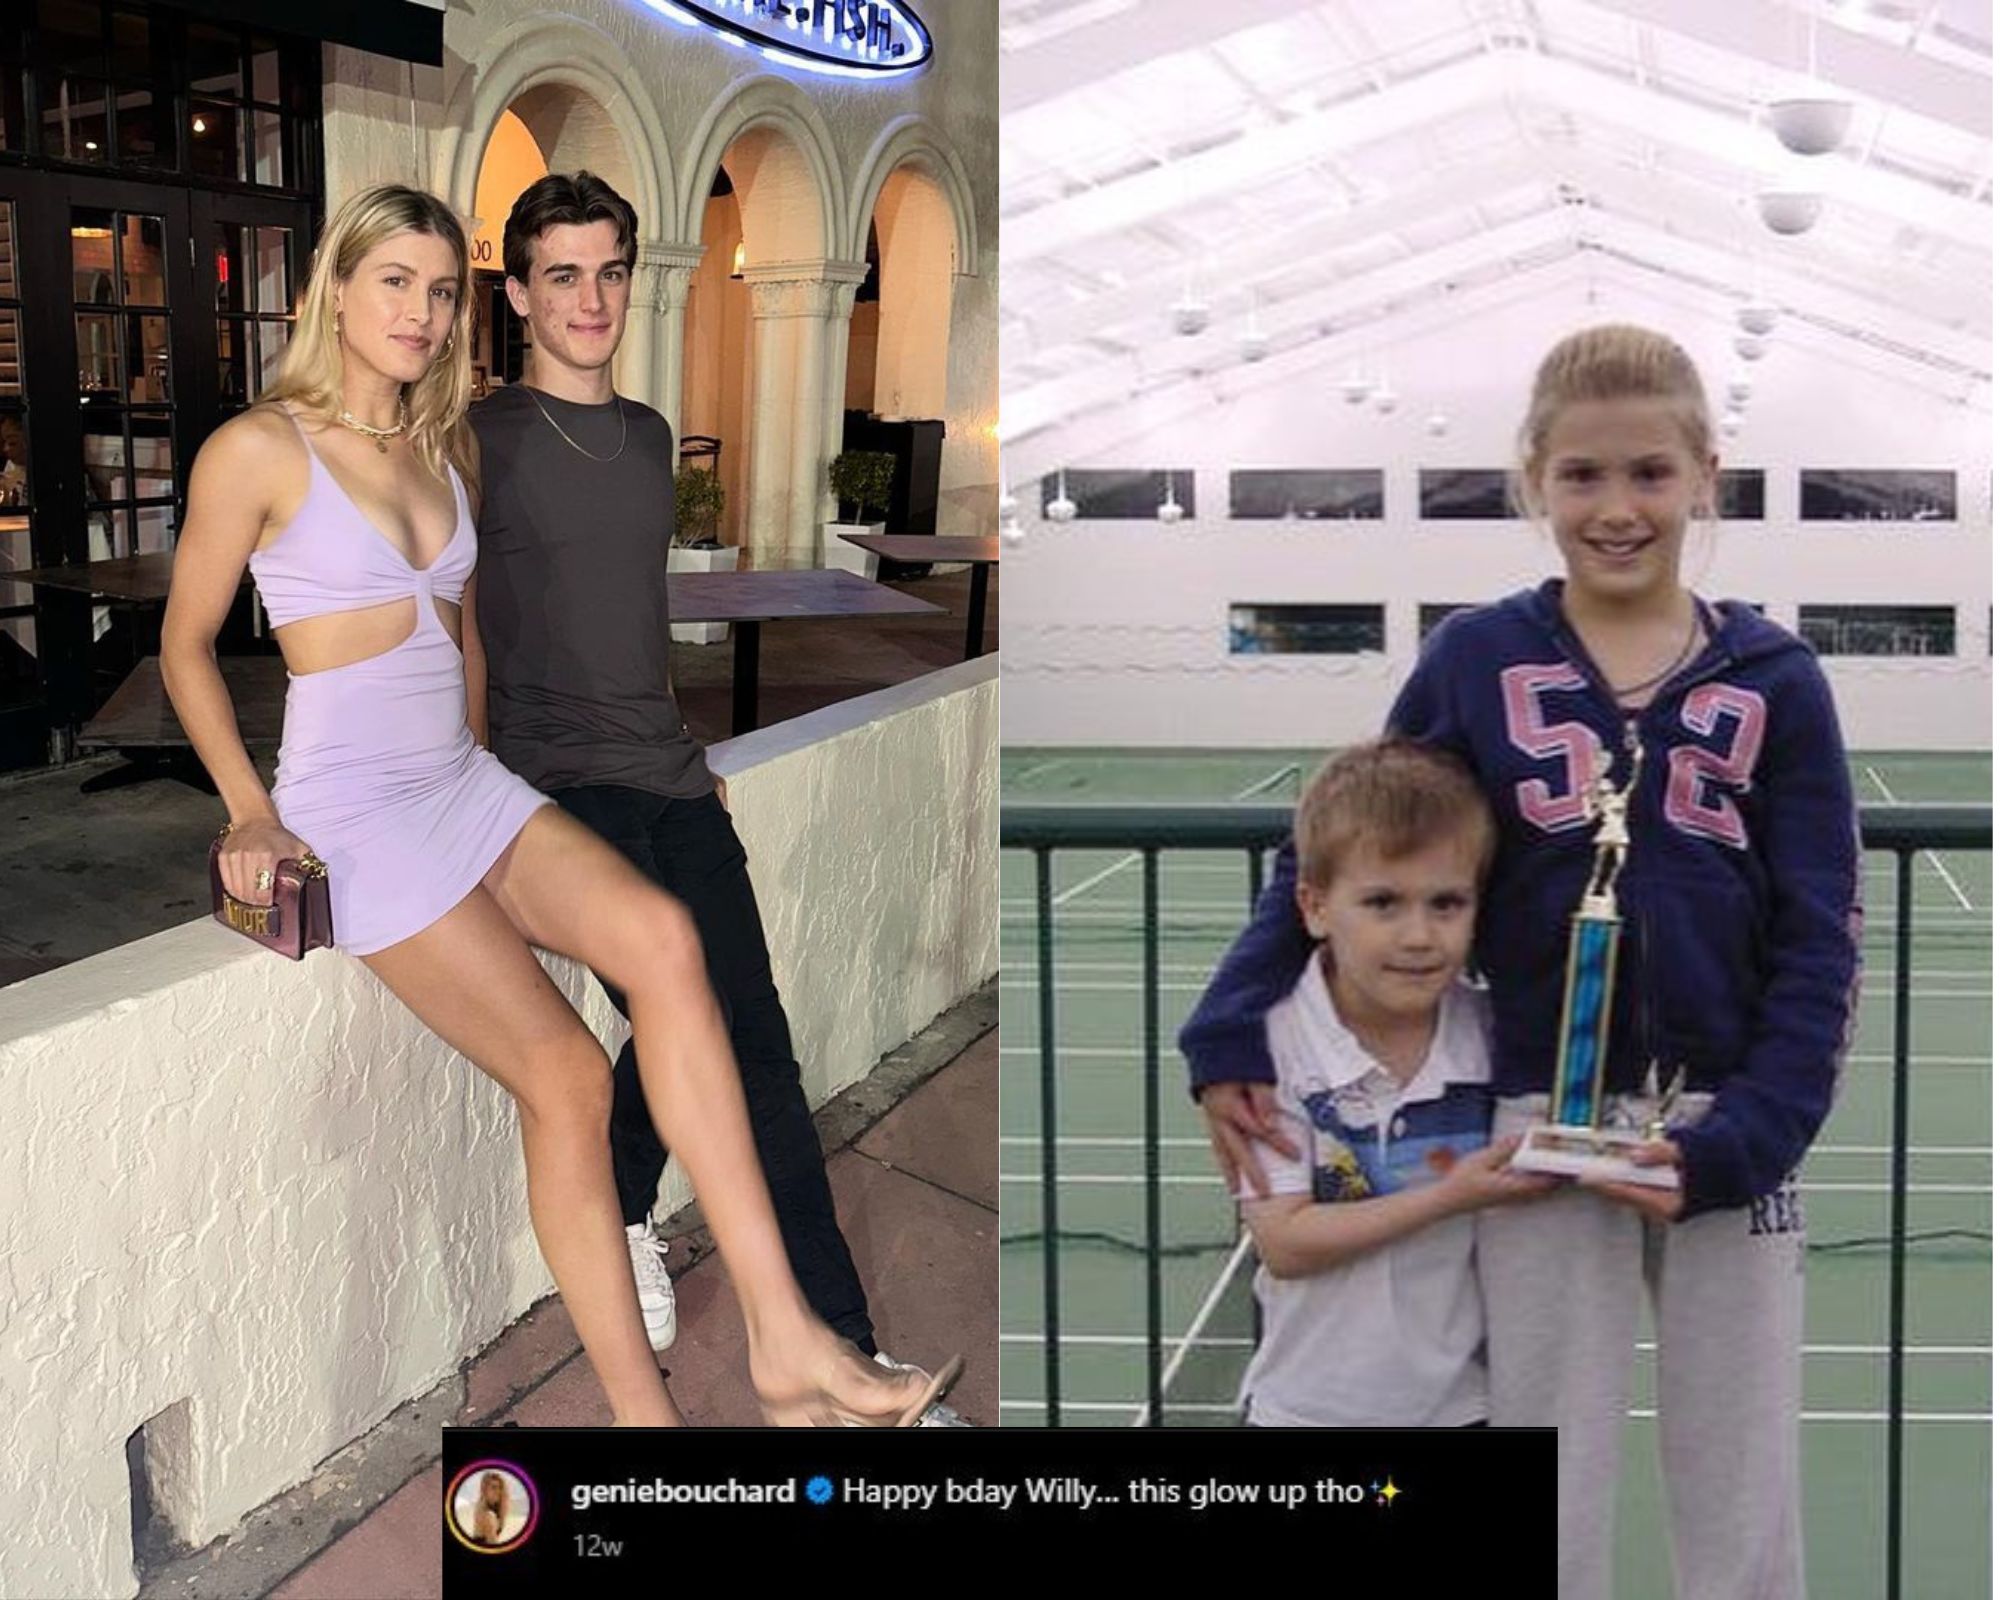 Eugenie Bouchard Brother: Who Is William Bouchard?